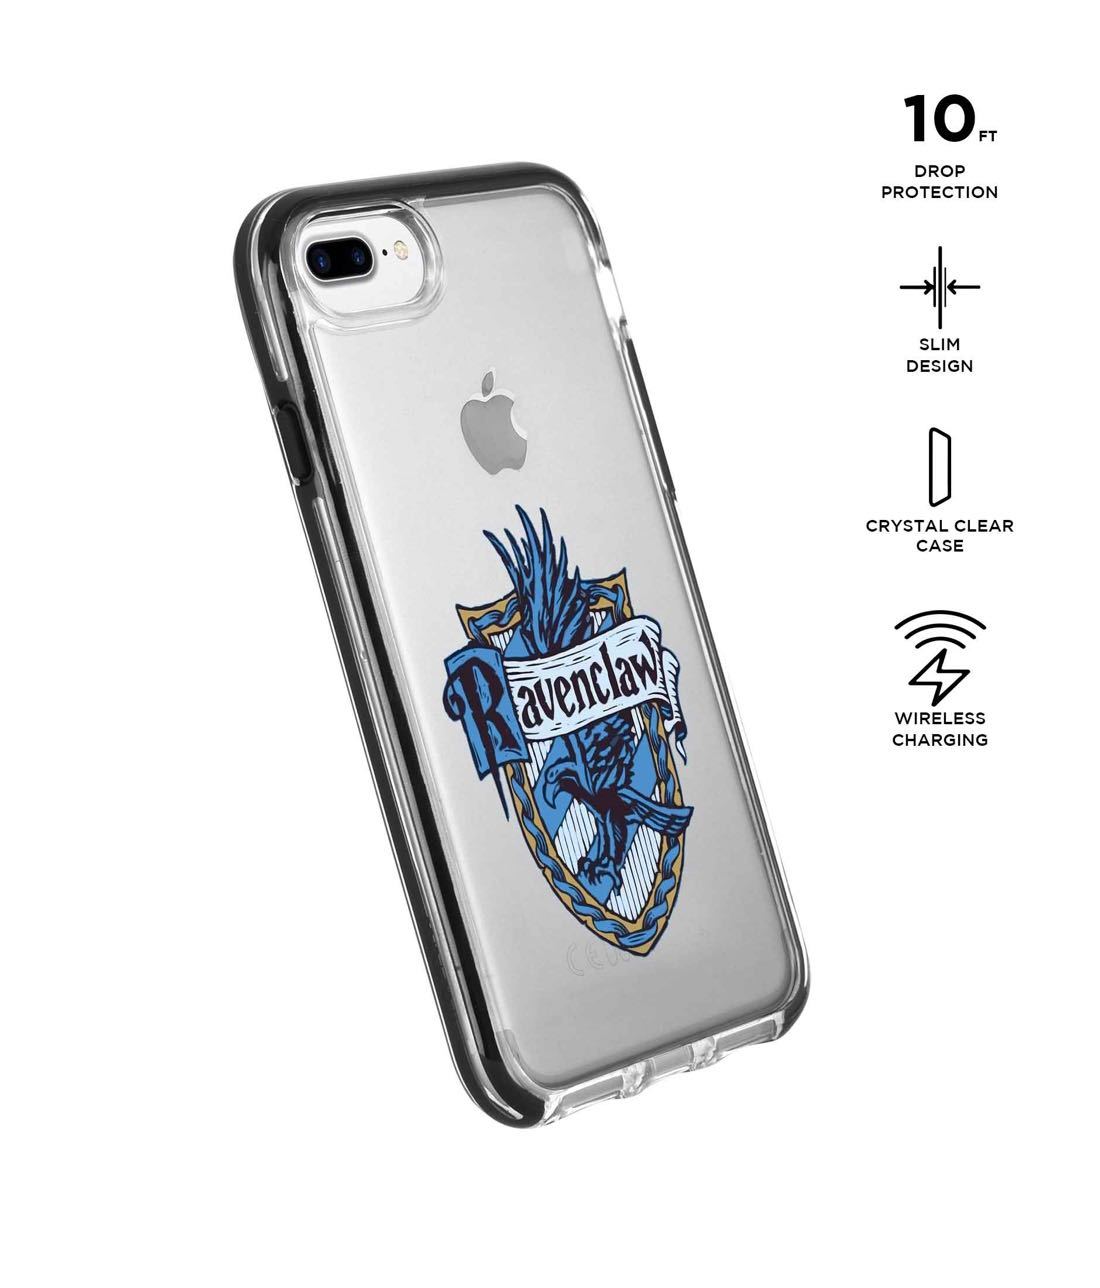 Crest Ravenclaw - Extreme Phone Case for iPhone 7 Plus